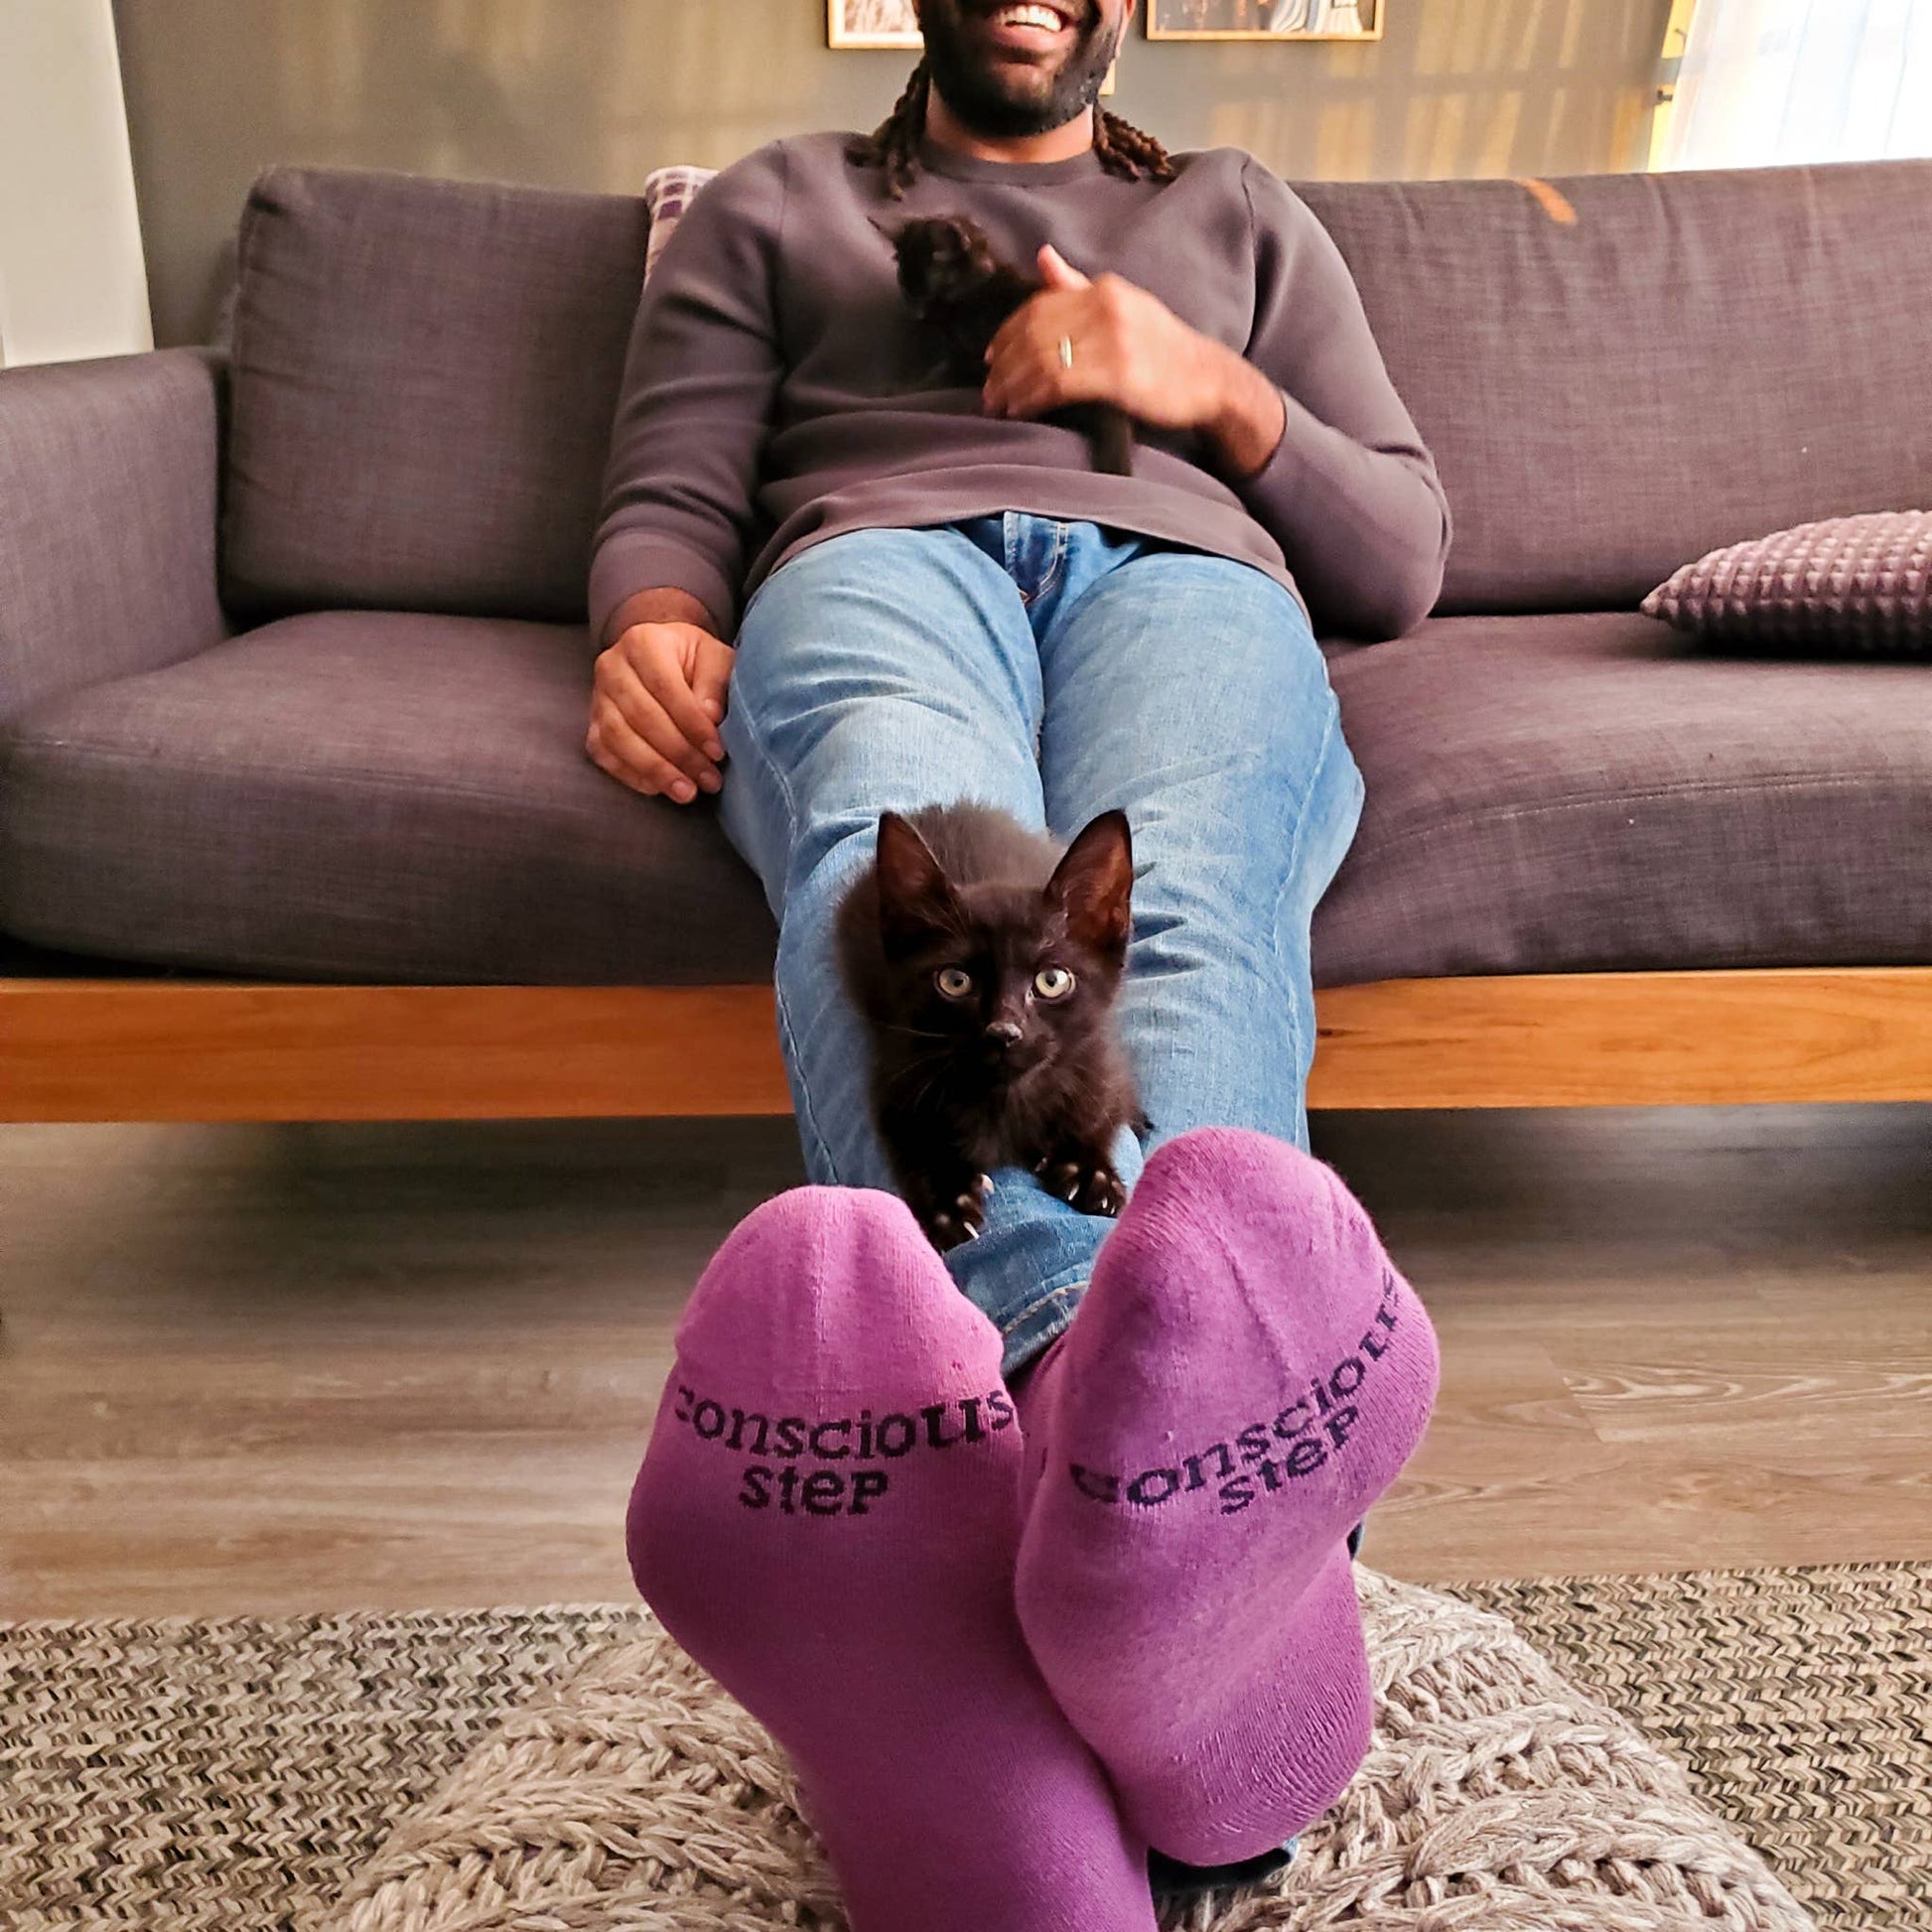 Conscious Step - Socks that Save Cats (Purple Cats)  Conscious Step   -better made easy-eco-friendly-sustainable-gifting